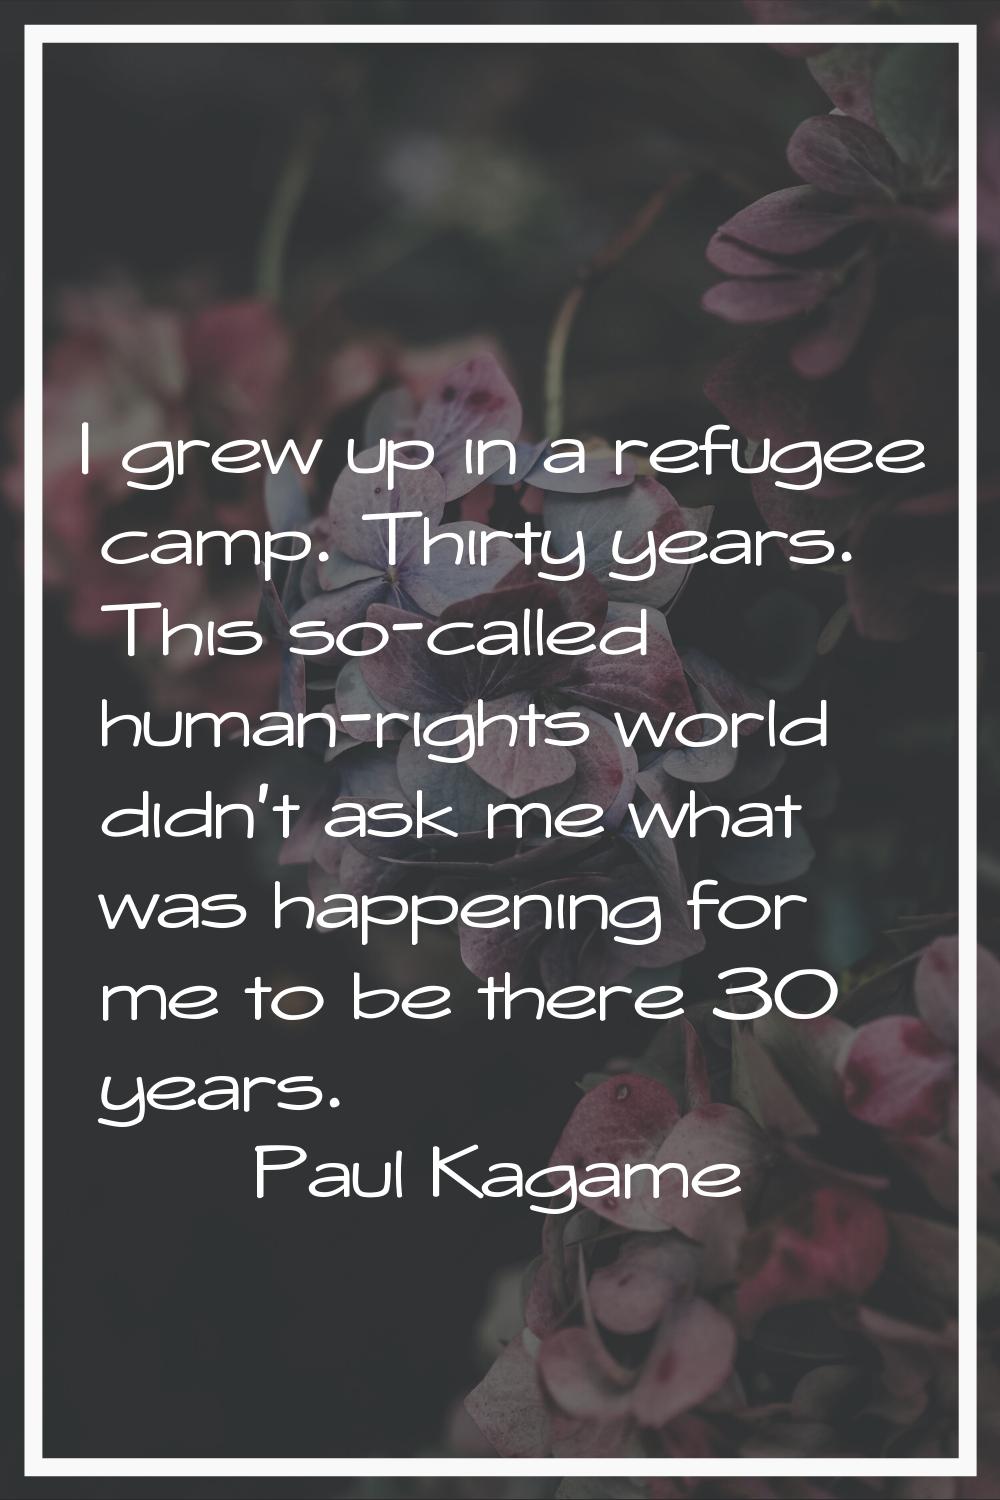 I grew up in a refugee camp. Thirty years. This so-called human-rights world didn't ask me what was